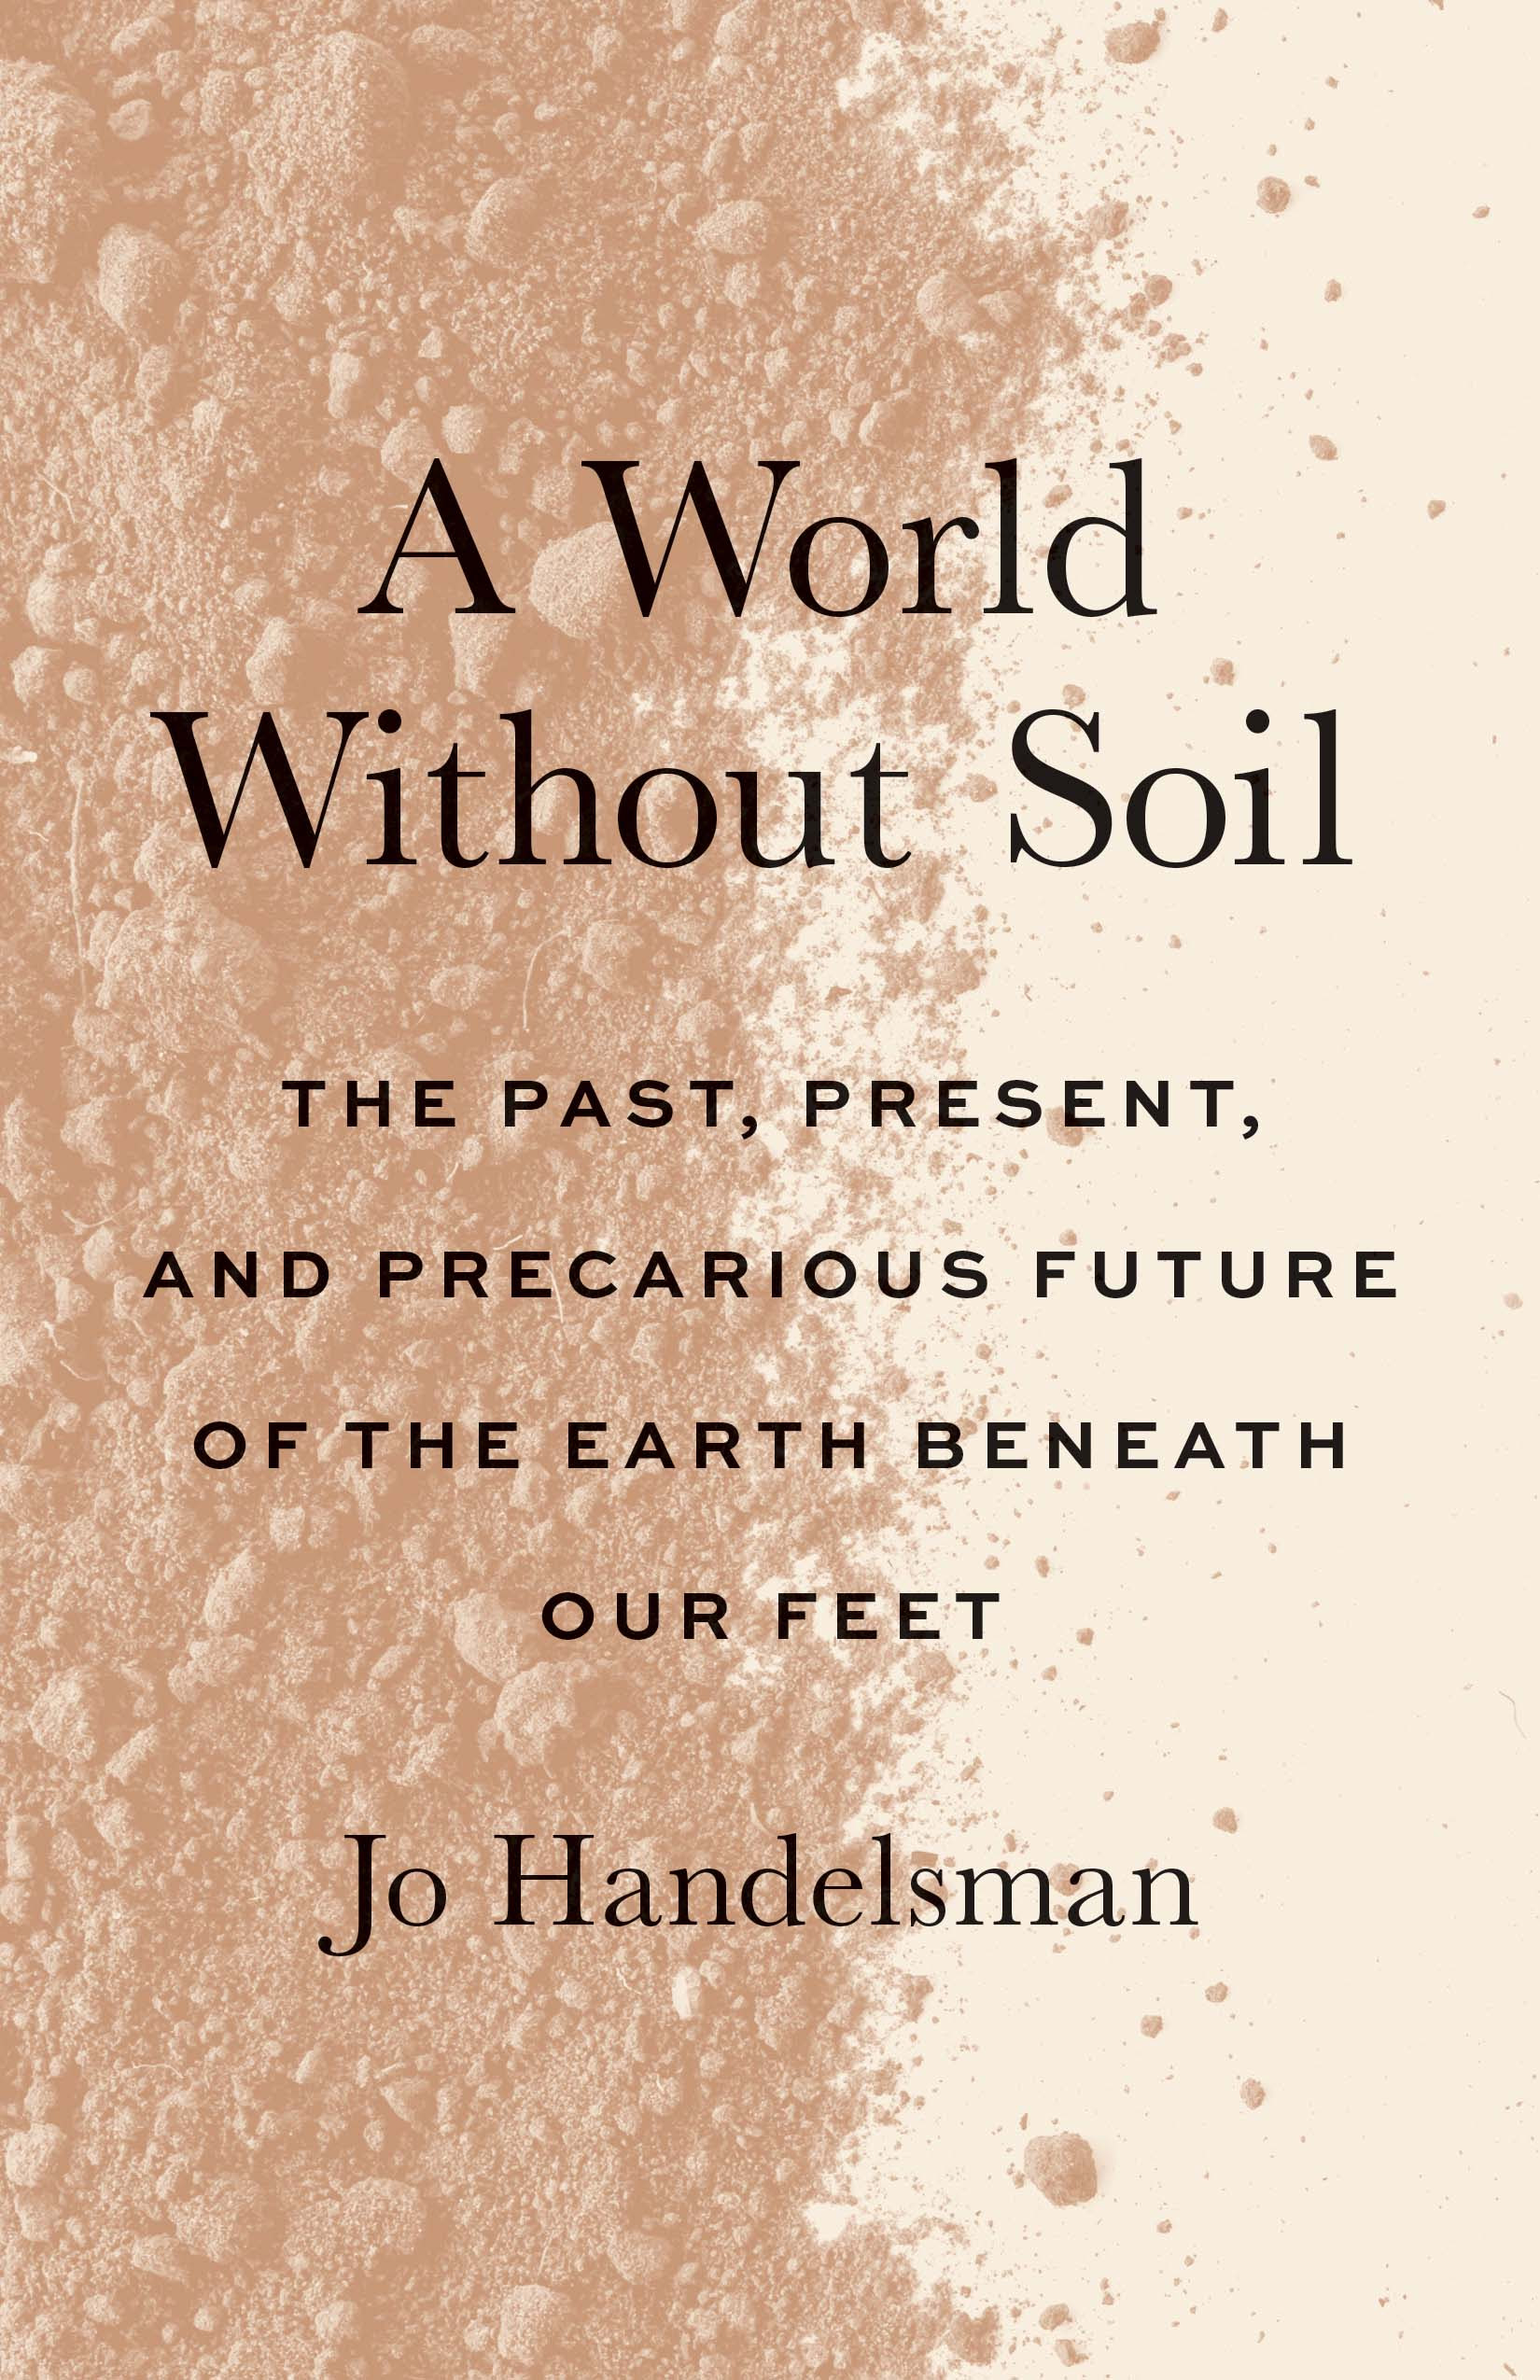 A World Without Soil: The Past, Present, and Precarious Future of the Earth Beneath Our Feet in Kindle/PDF/EPUB